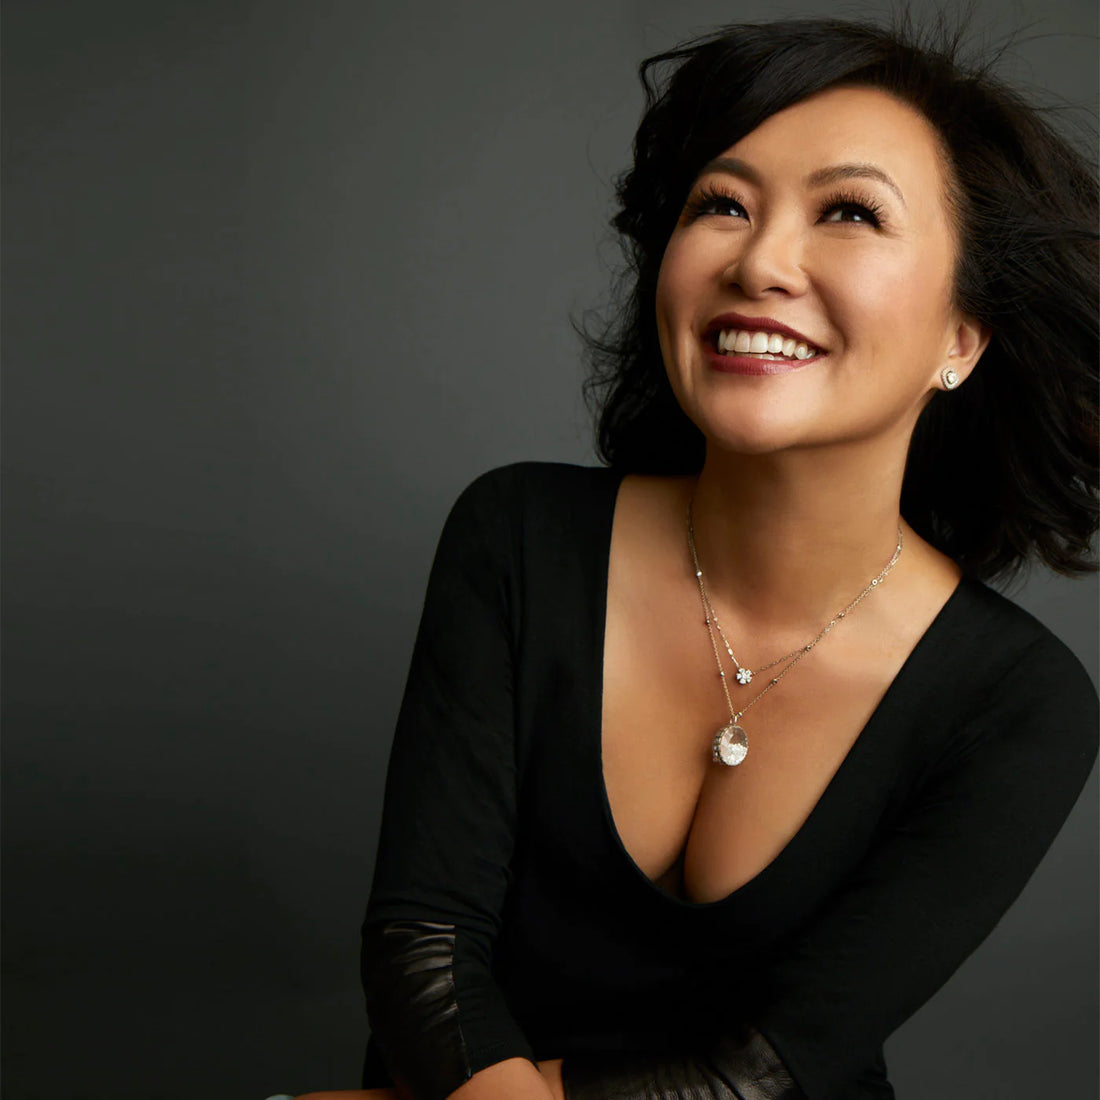 Interview: Emily Lau, founder, The Little Bra Company